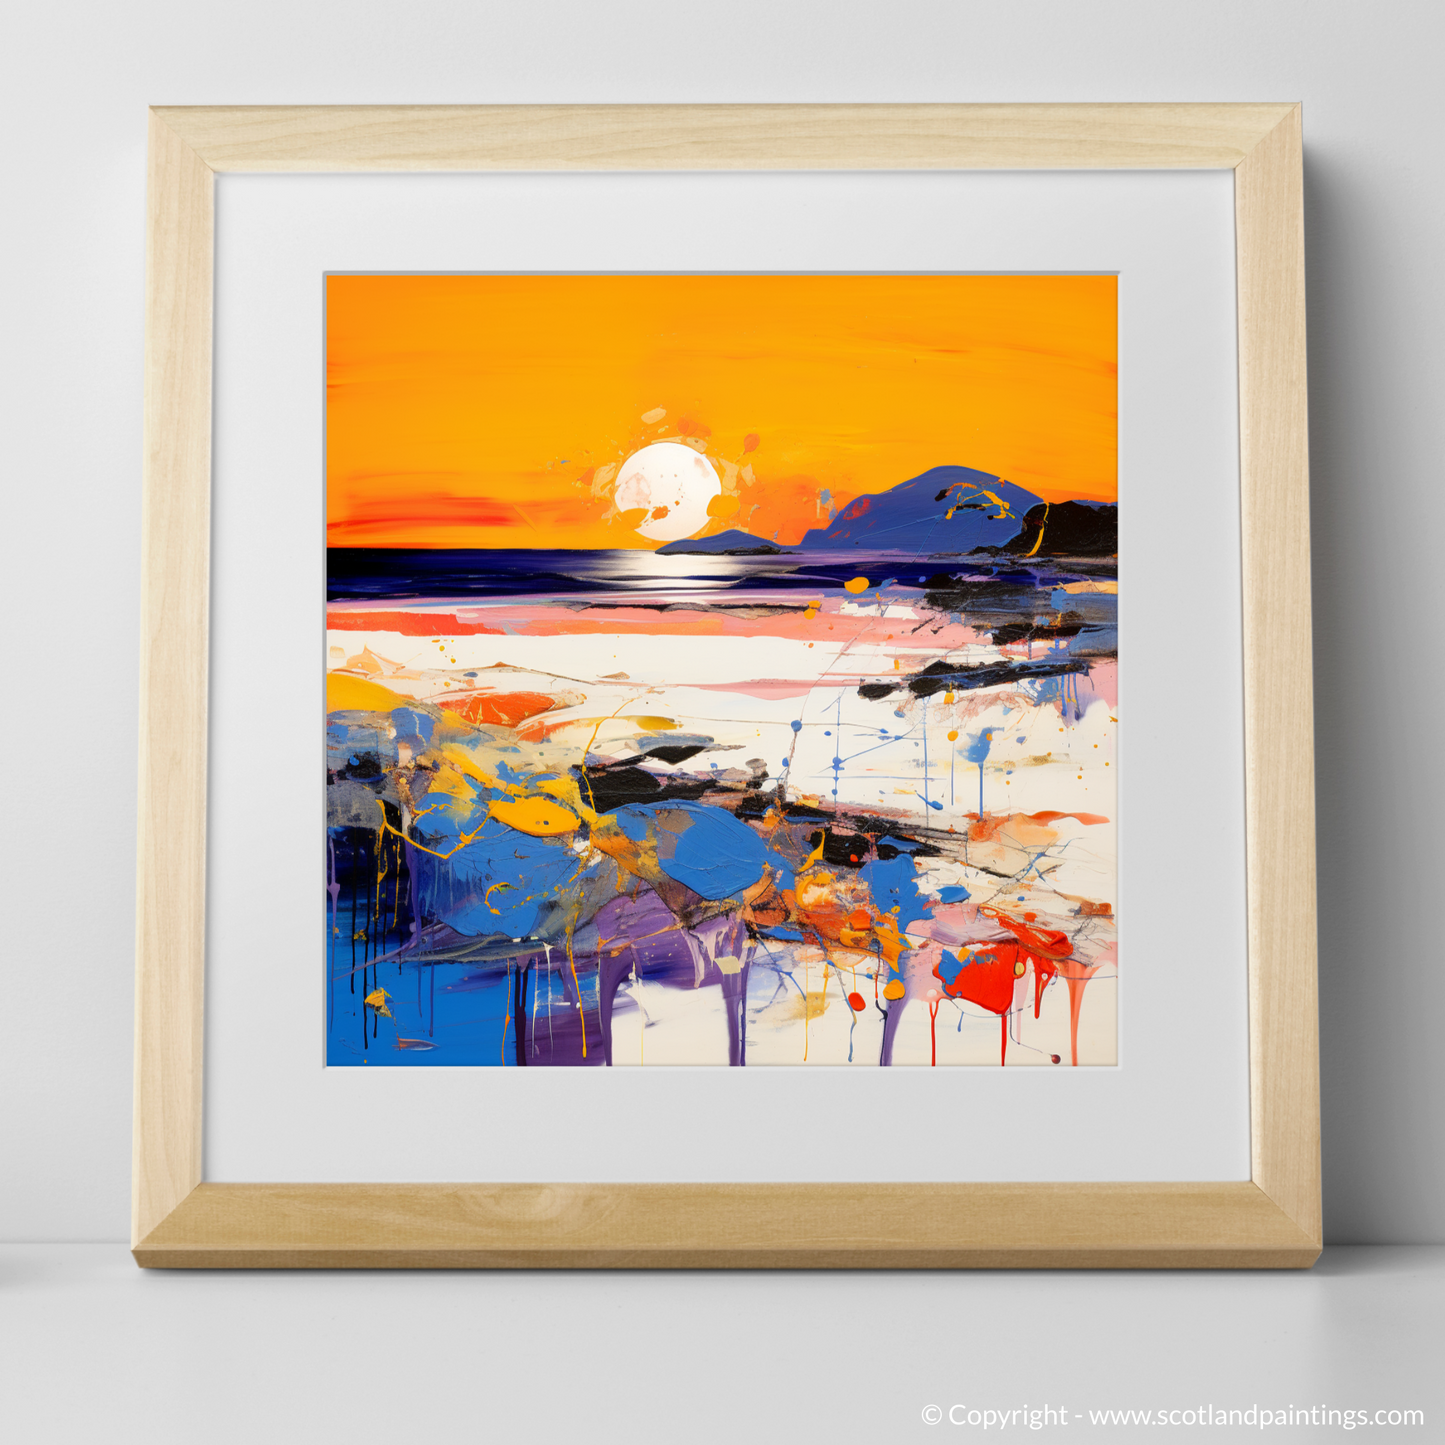 Arisaig Sunset Blaze: An Abstract Ode to Scottish Shores